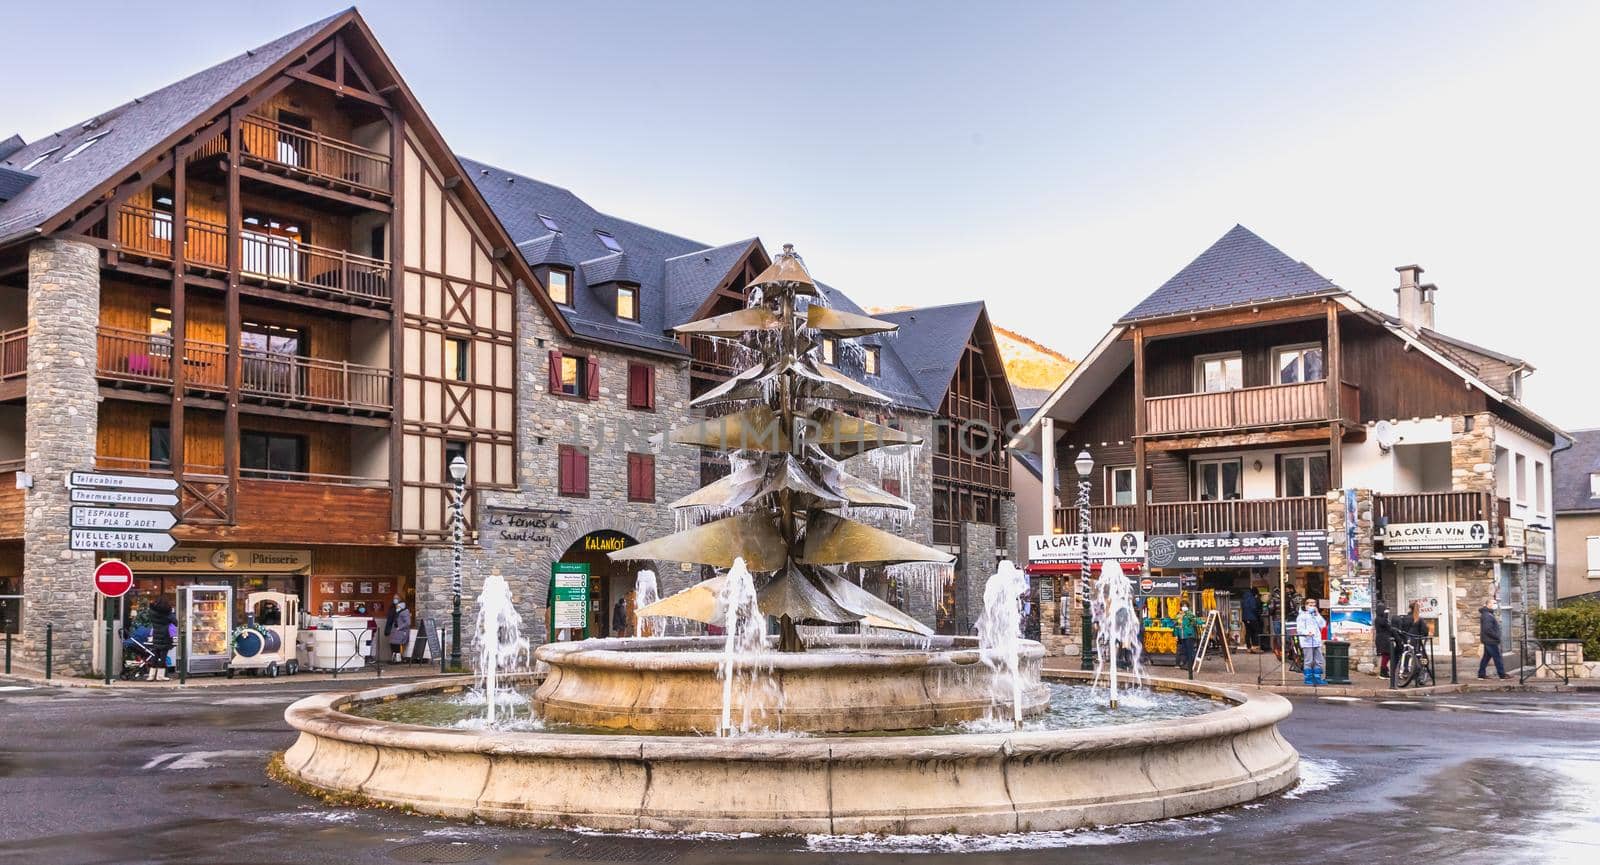 Saint Lary Soulan, France - December 26, 2020: fountain in the city center frozen by the cold on a winter day